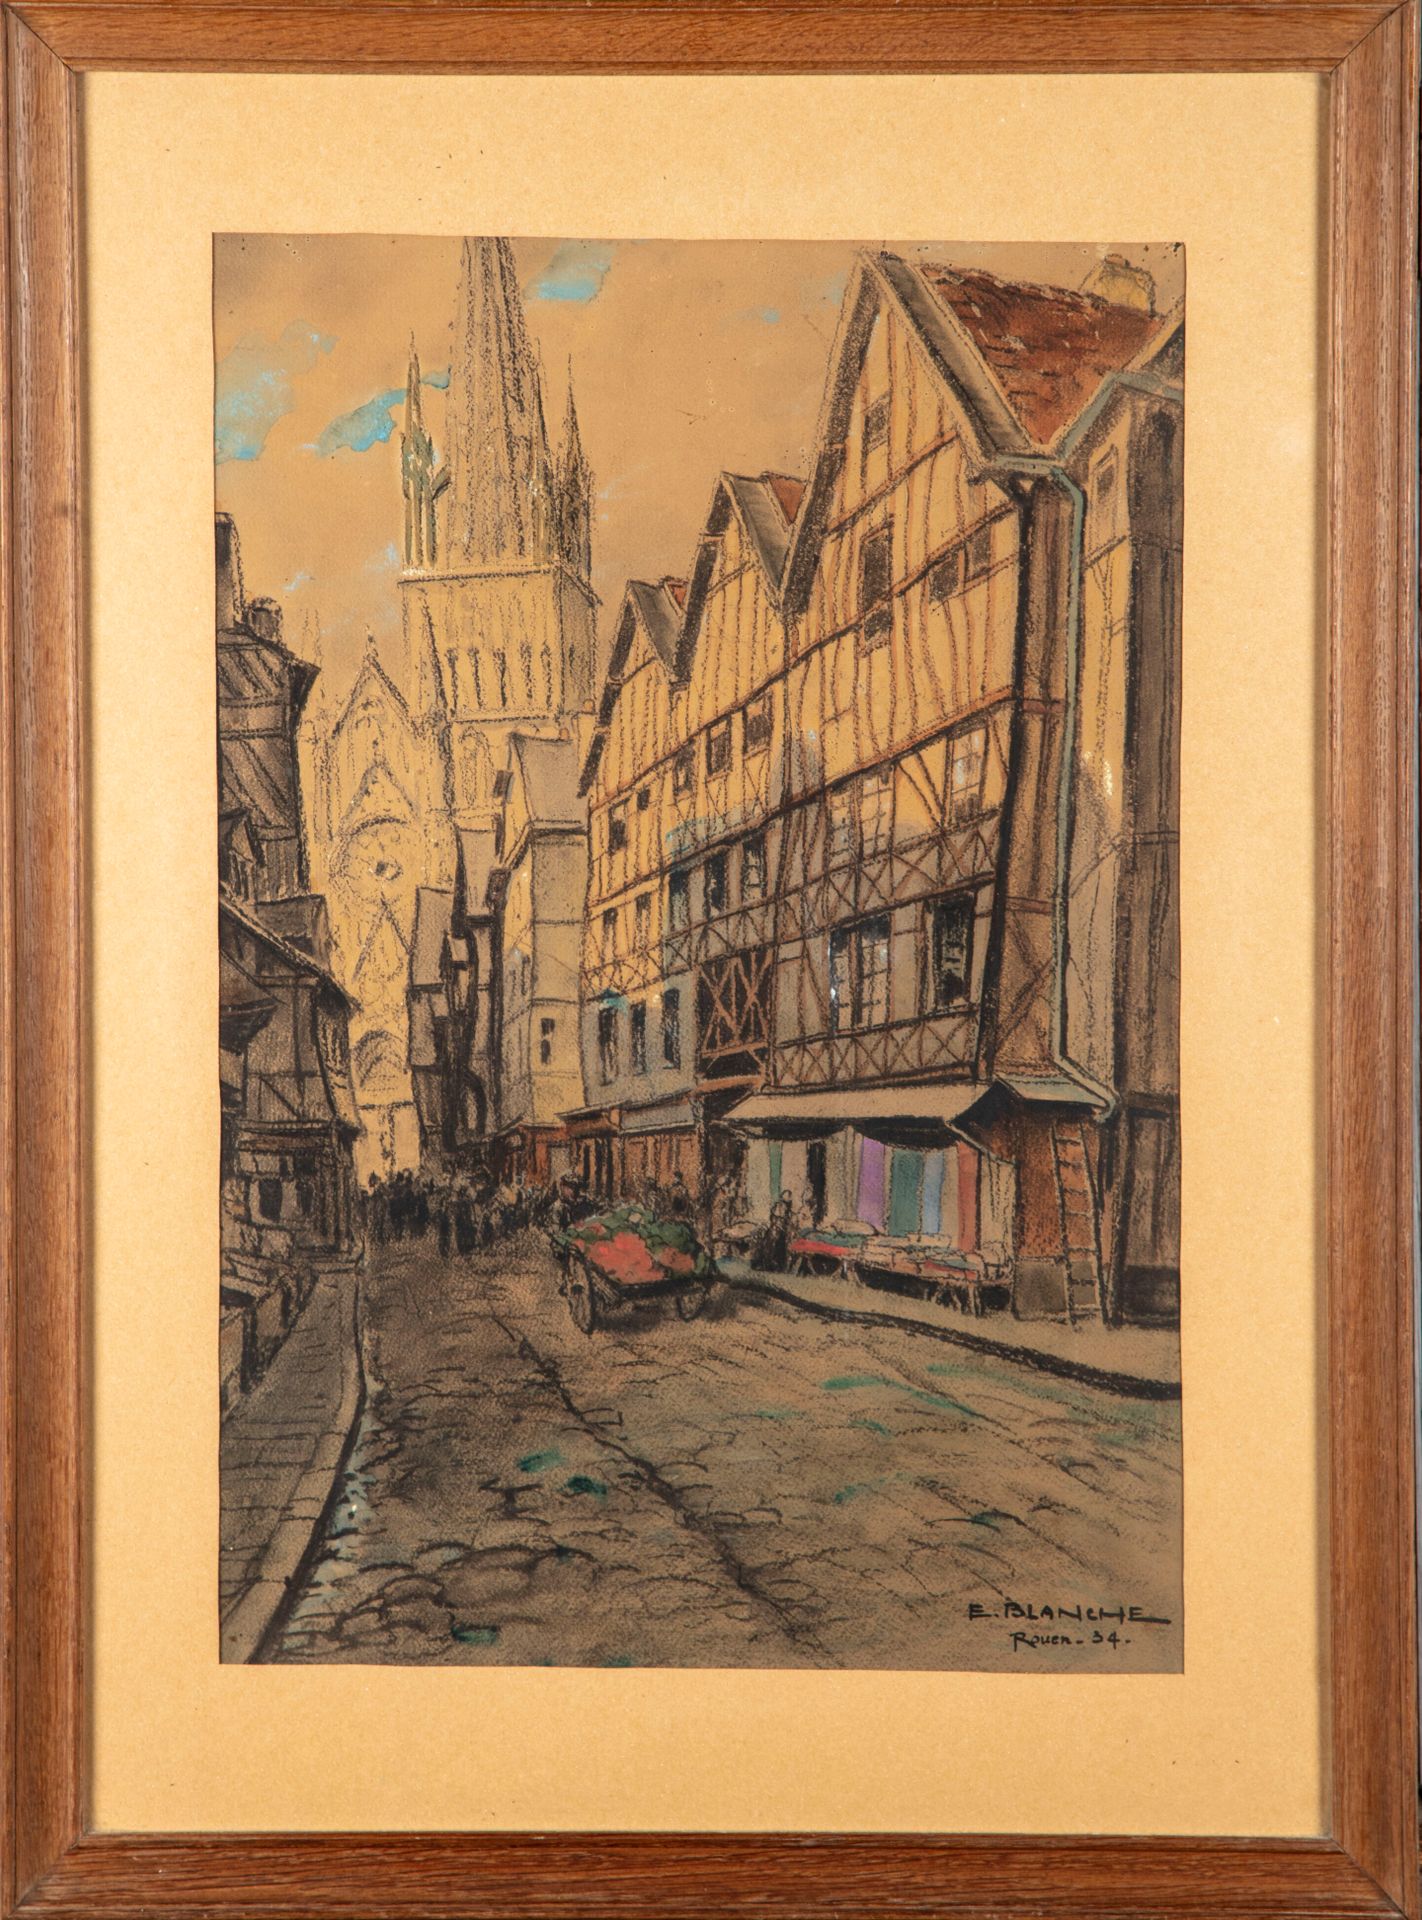 Null Emmanuel BLANCHE (1880-1946)

The street of the Grocery in Rouen

Pastel si&hellip;